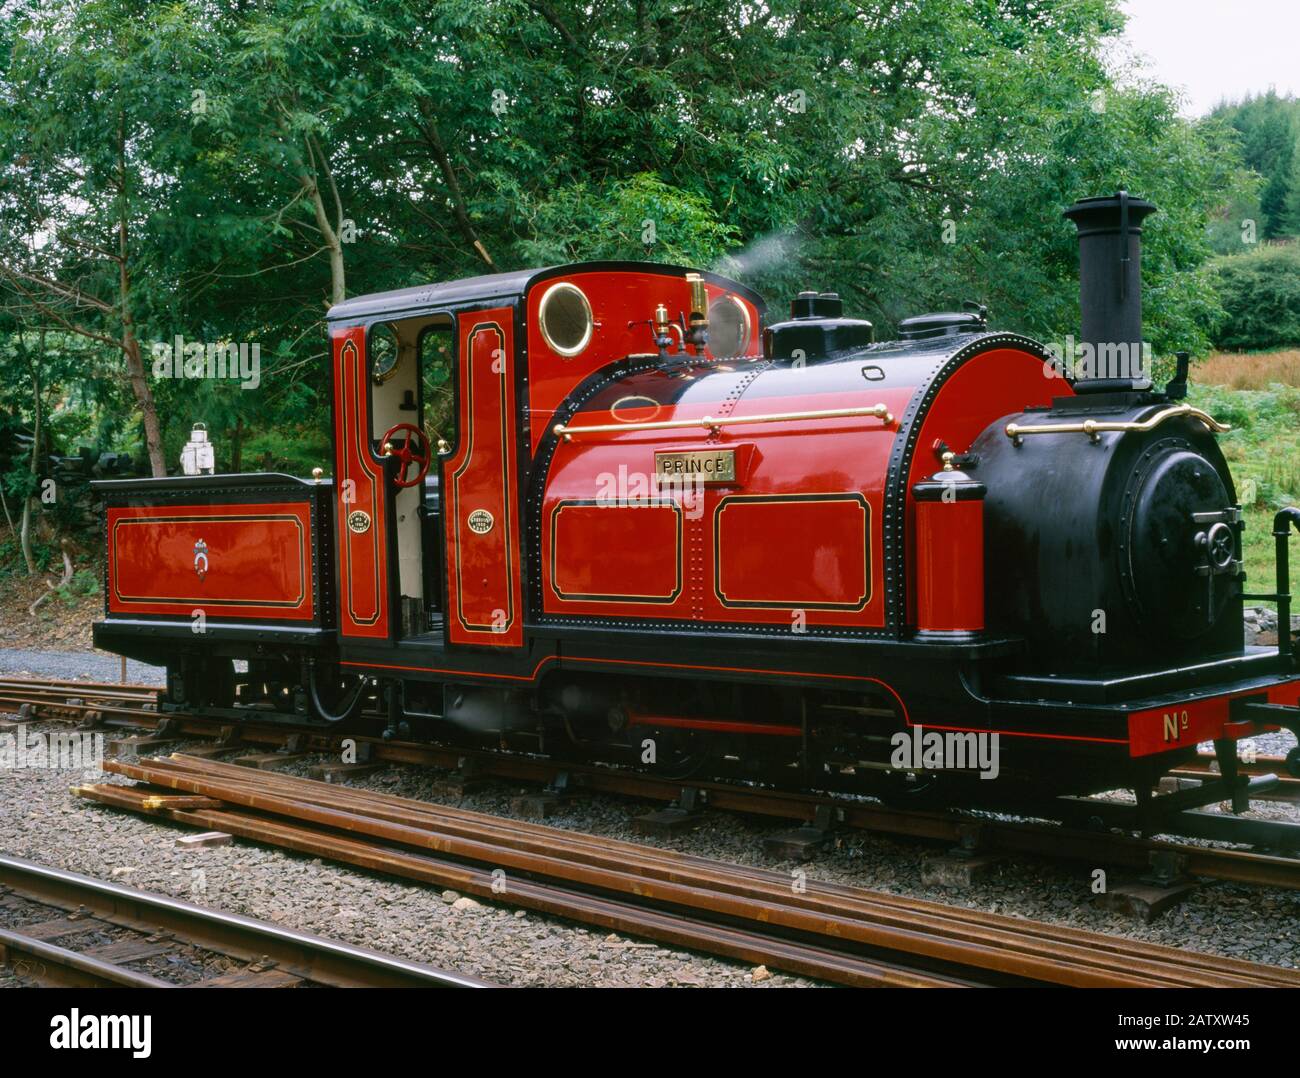 Prince at Tan-y-Bwlch Station, Wales, UK: a genuine vintage steam engine of the Ffestiniog narrow-gauge railway, built 1864 by George England and Co. Stock Photo